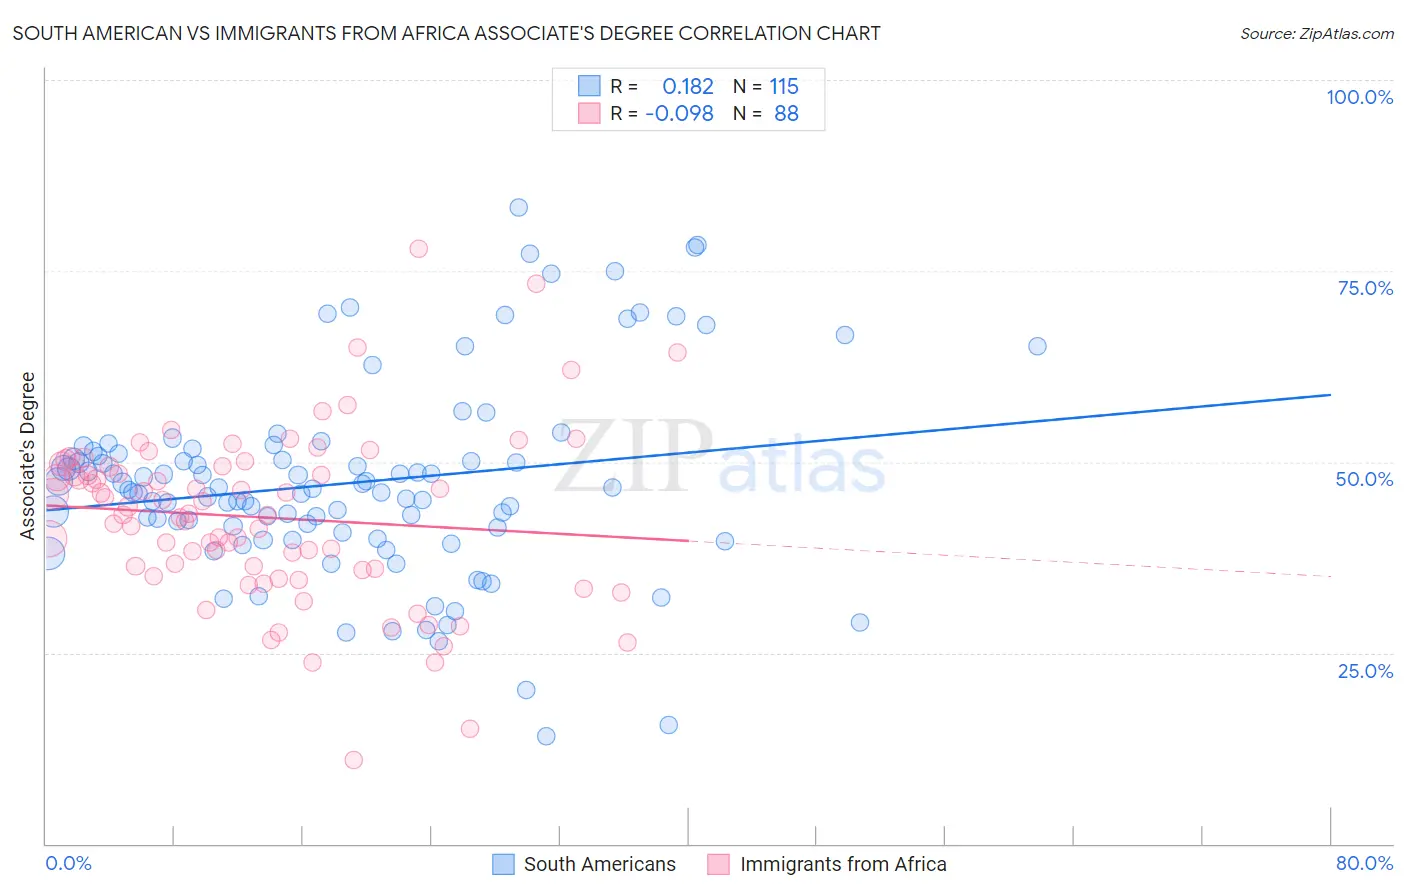 South American vs Immigrants from Africa Associate's Degree